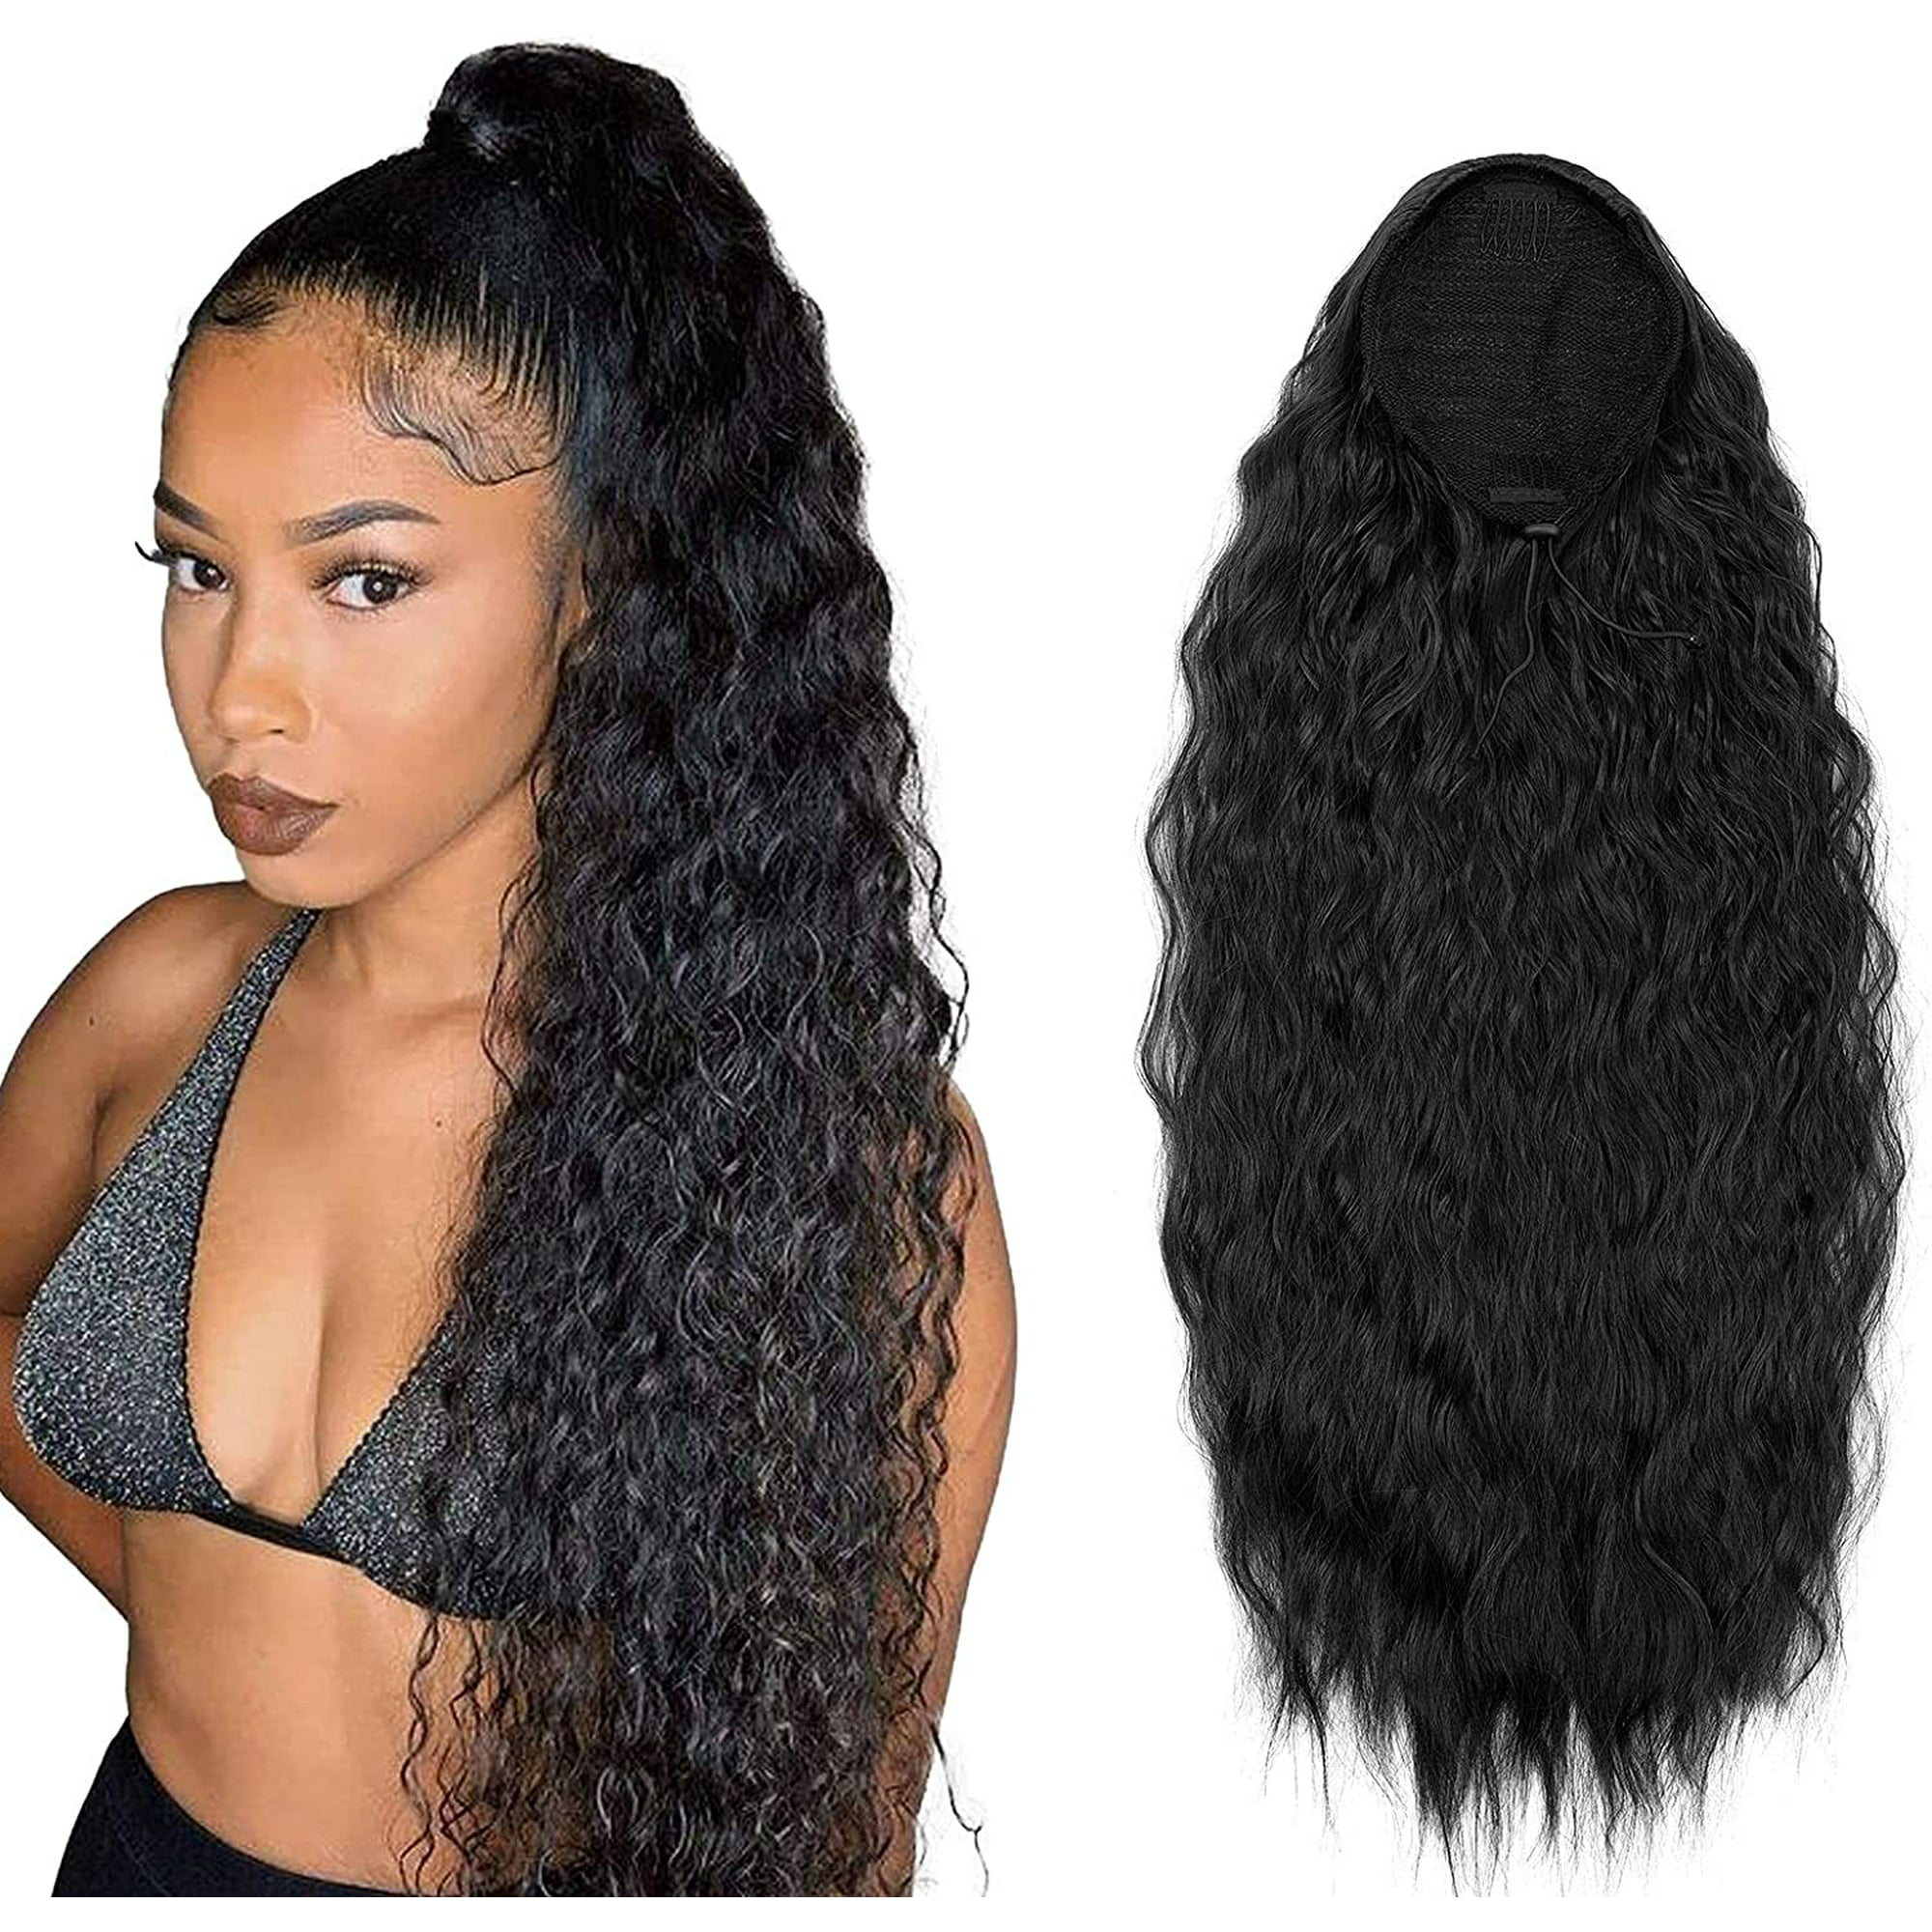 Qianli Teruntrue 24 Inch Long Curly Ponytail Hair Extension, Black  Synthetic Ponytail Drawstring Ponytail Extensions (1B#), 24 Inch Curly  Drawstring | Walmart Canada